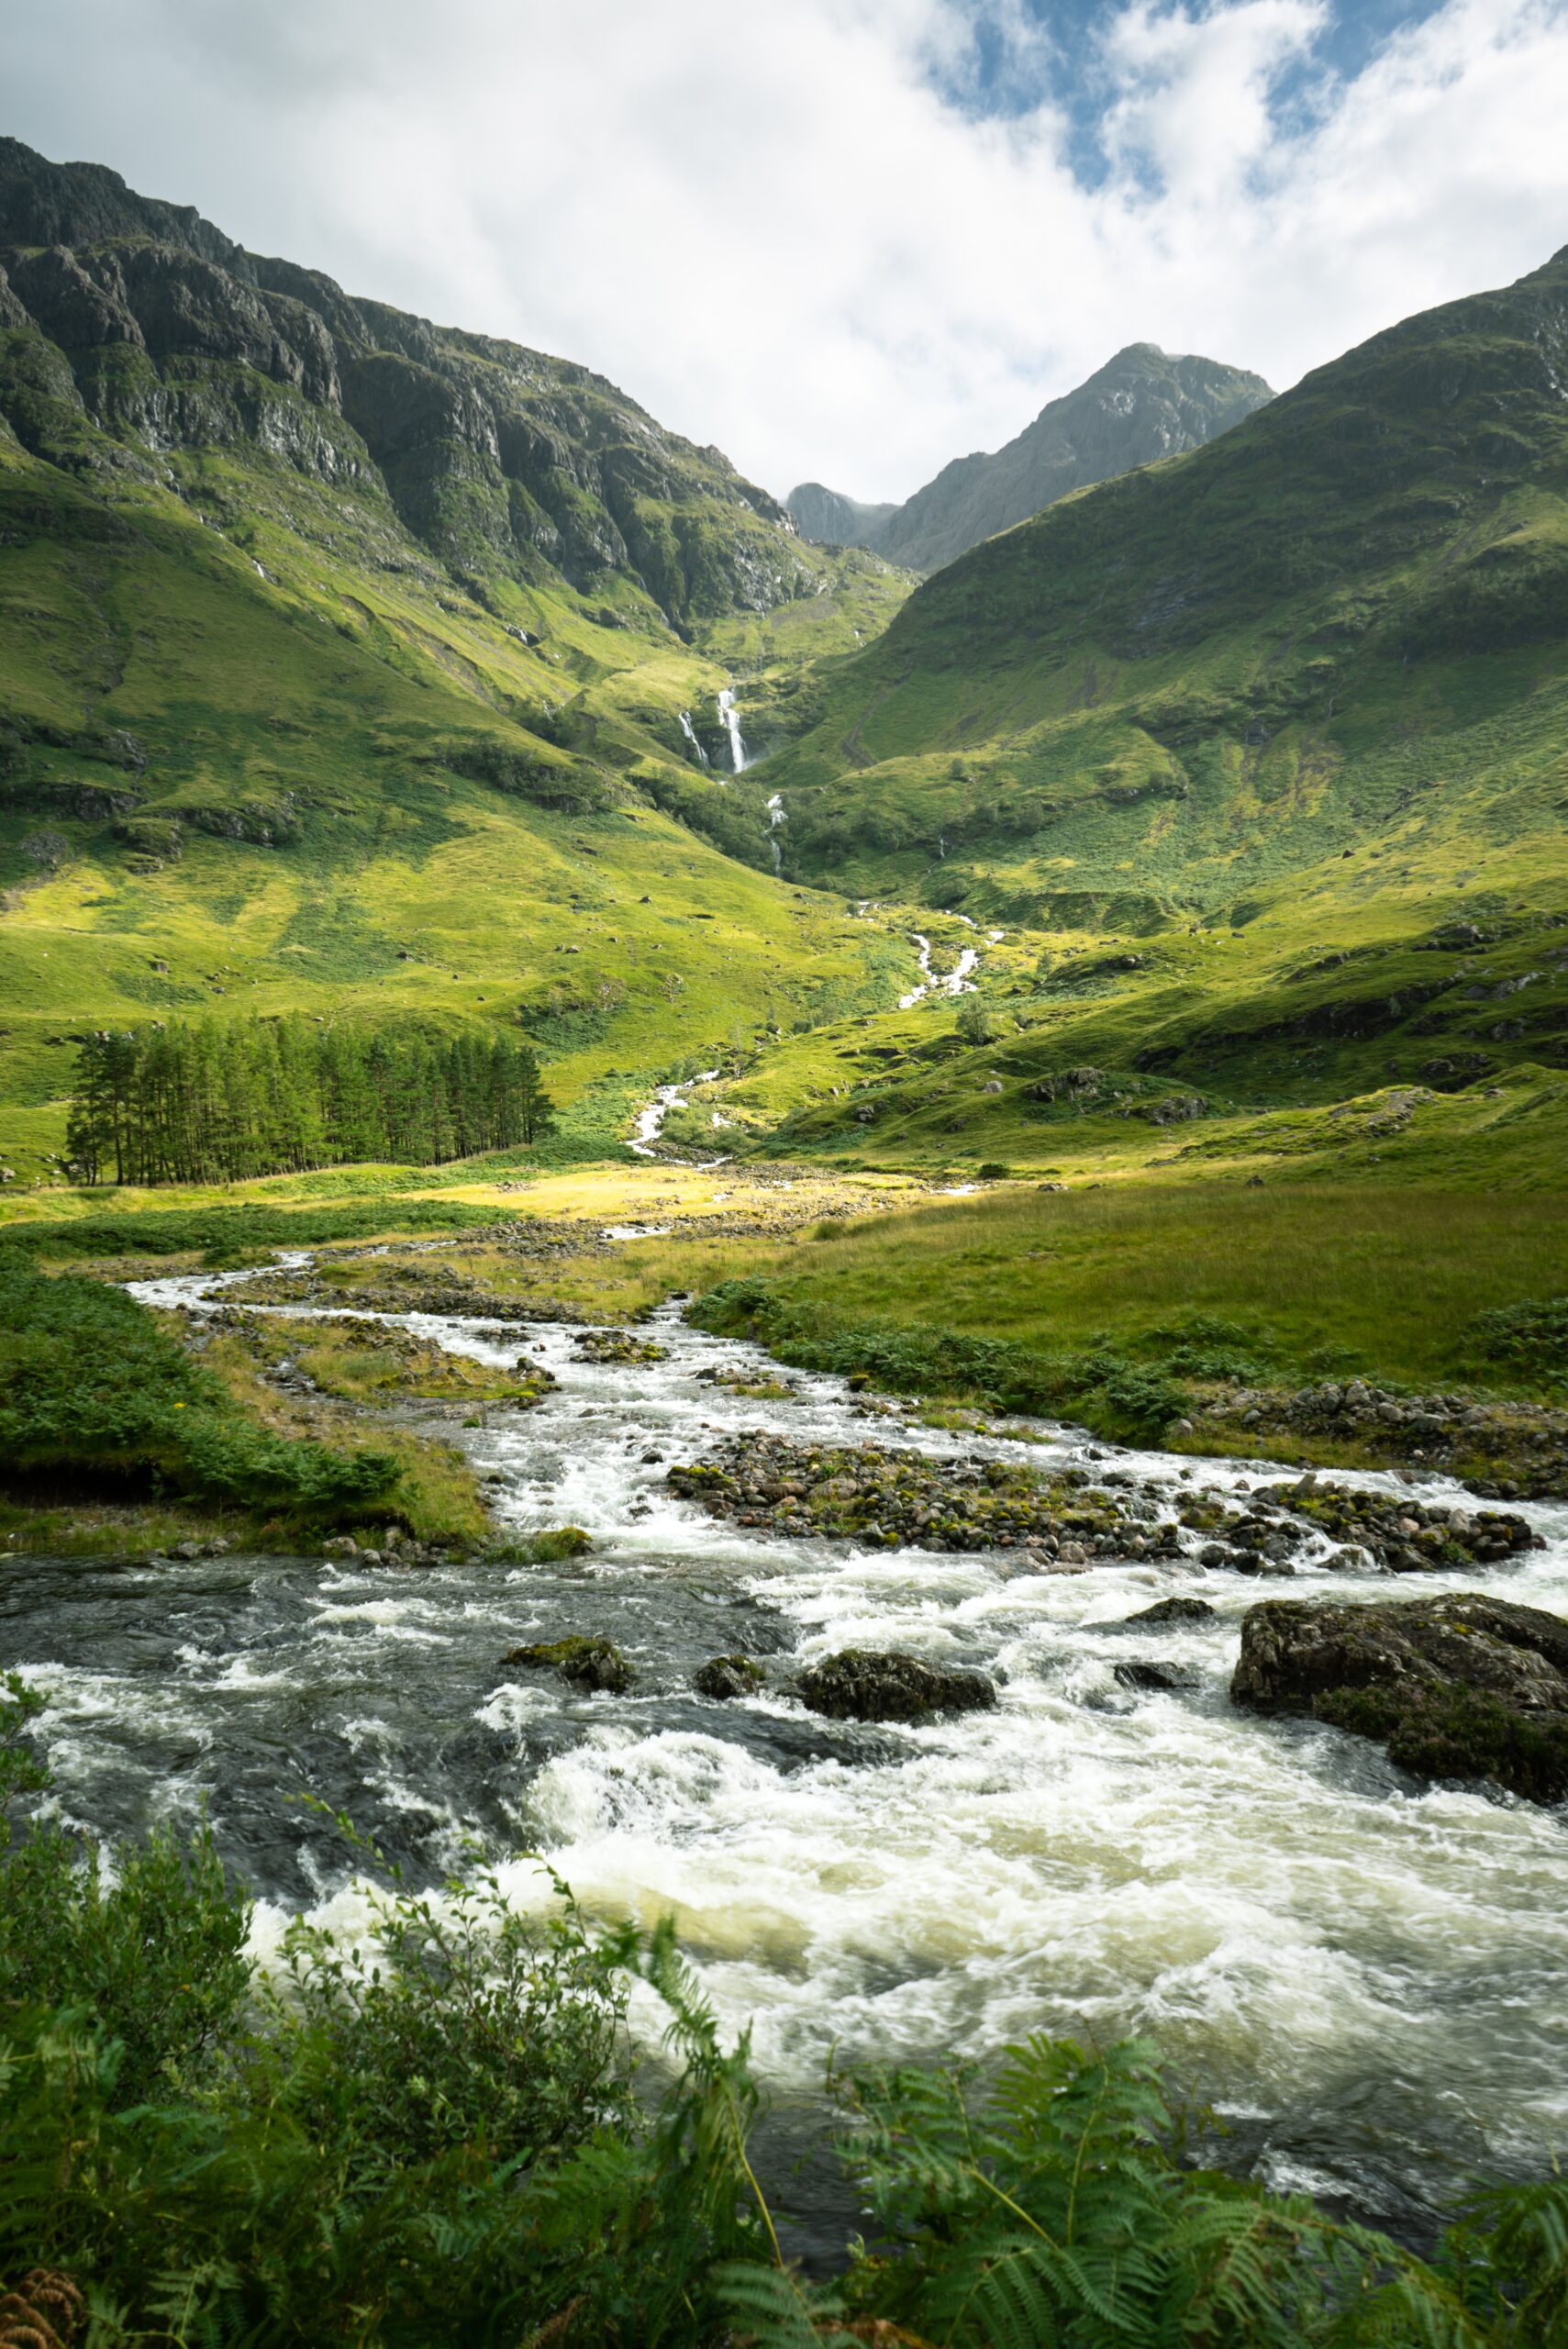 A vertical shot of a river surrounded by the mountains and meadows in Scotland